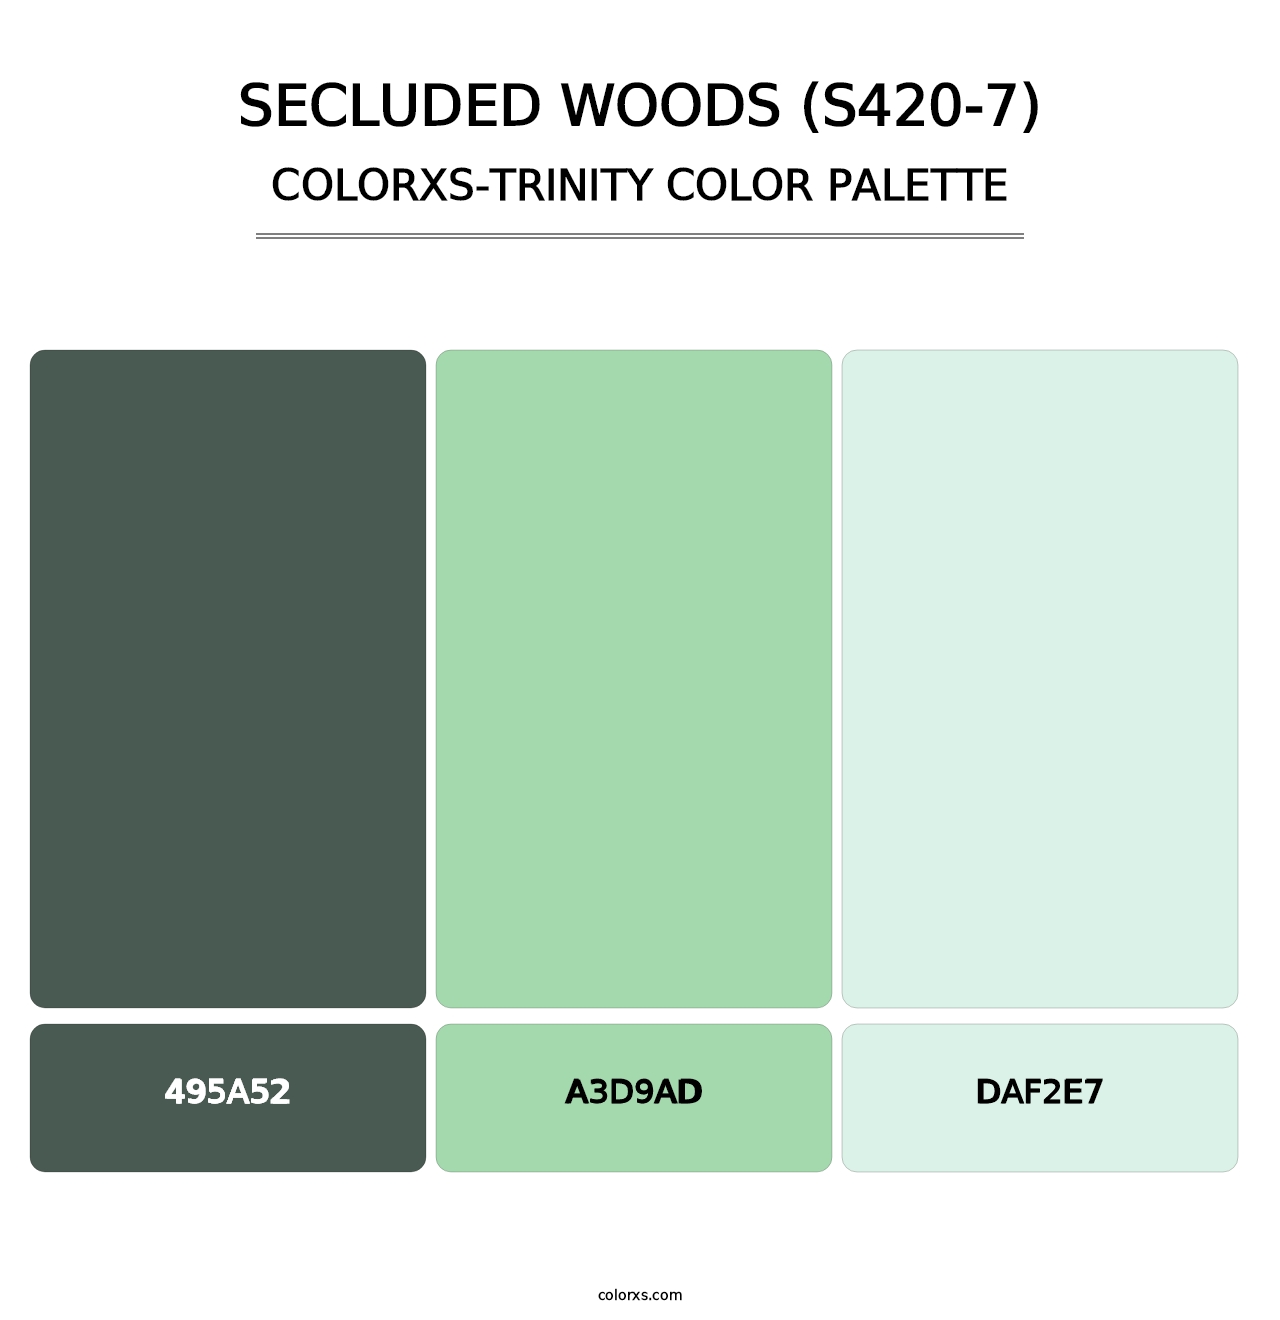 Secluded Woods (S420-7) - Colorxs Trinity Palette